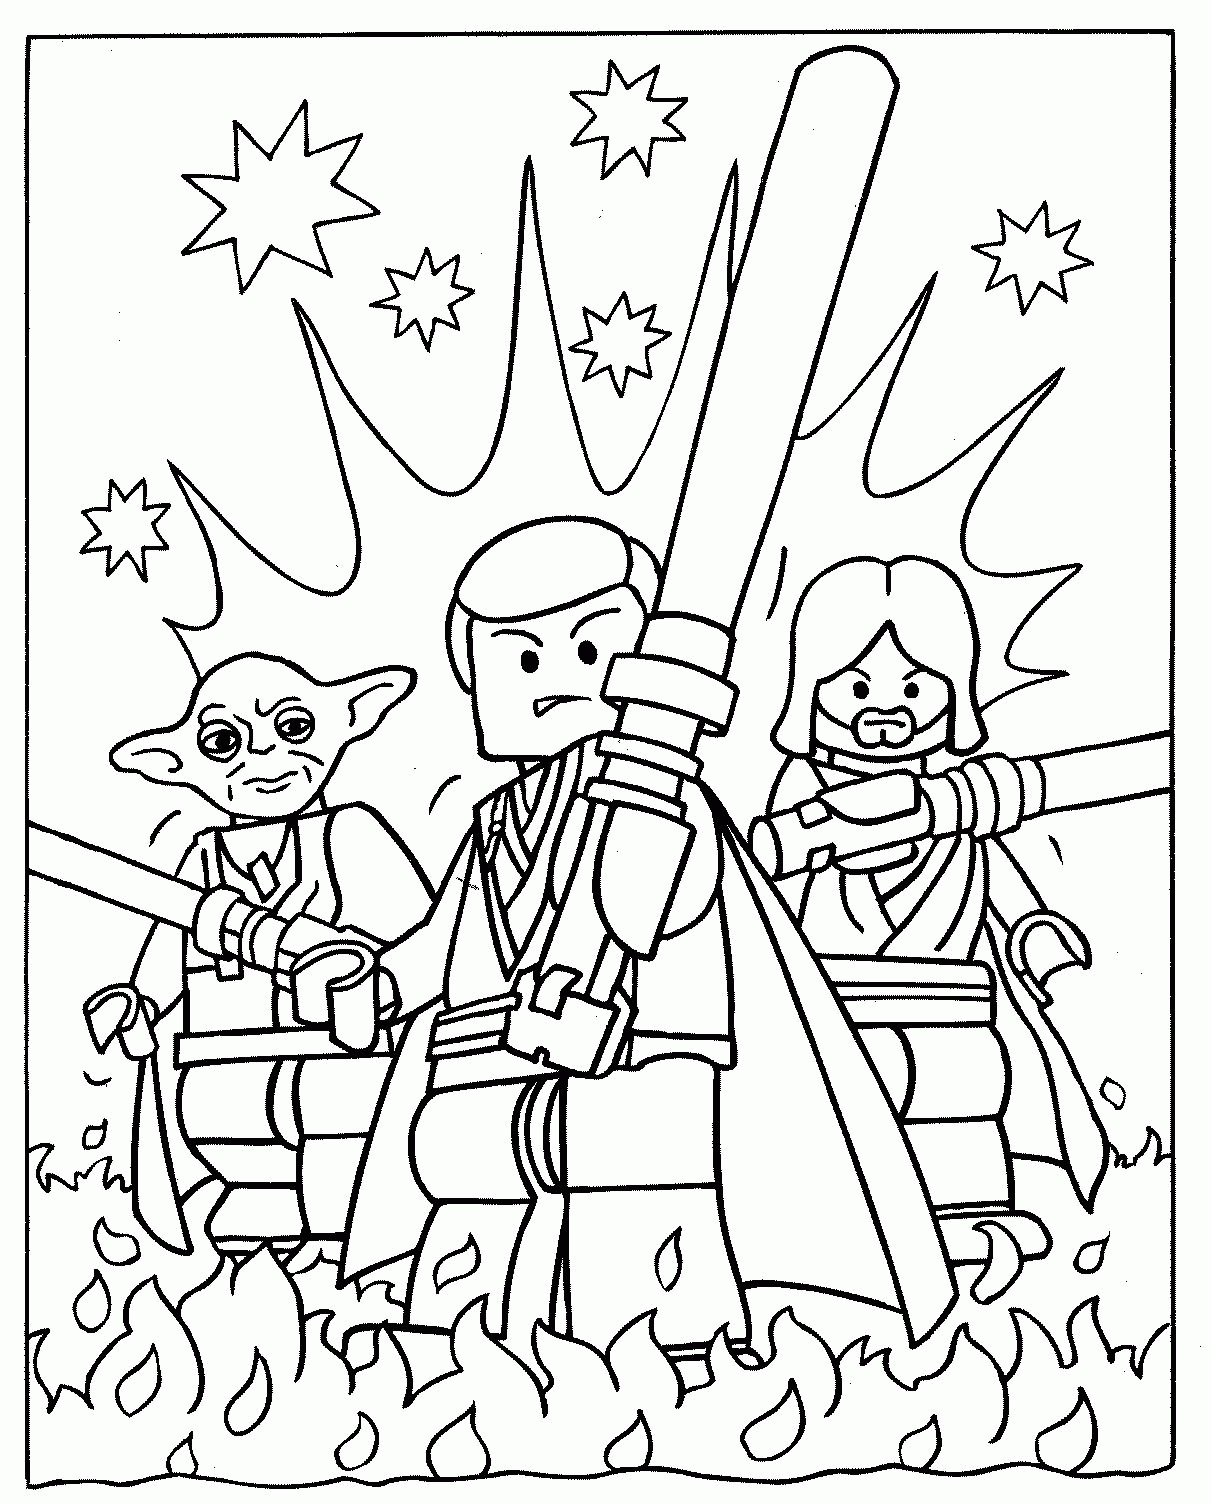 Lego Hero Factory Coloring Pages To Print - Coloring Page Photos